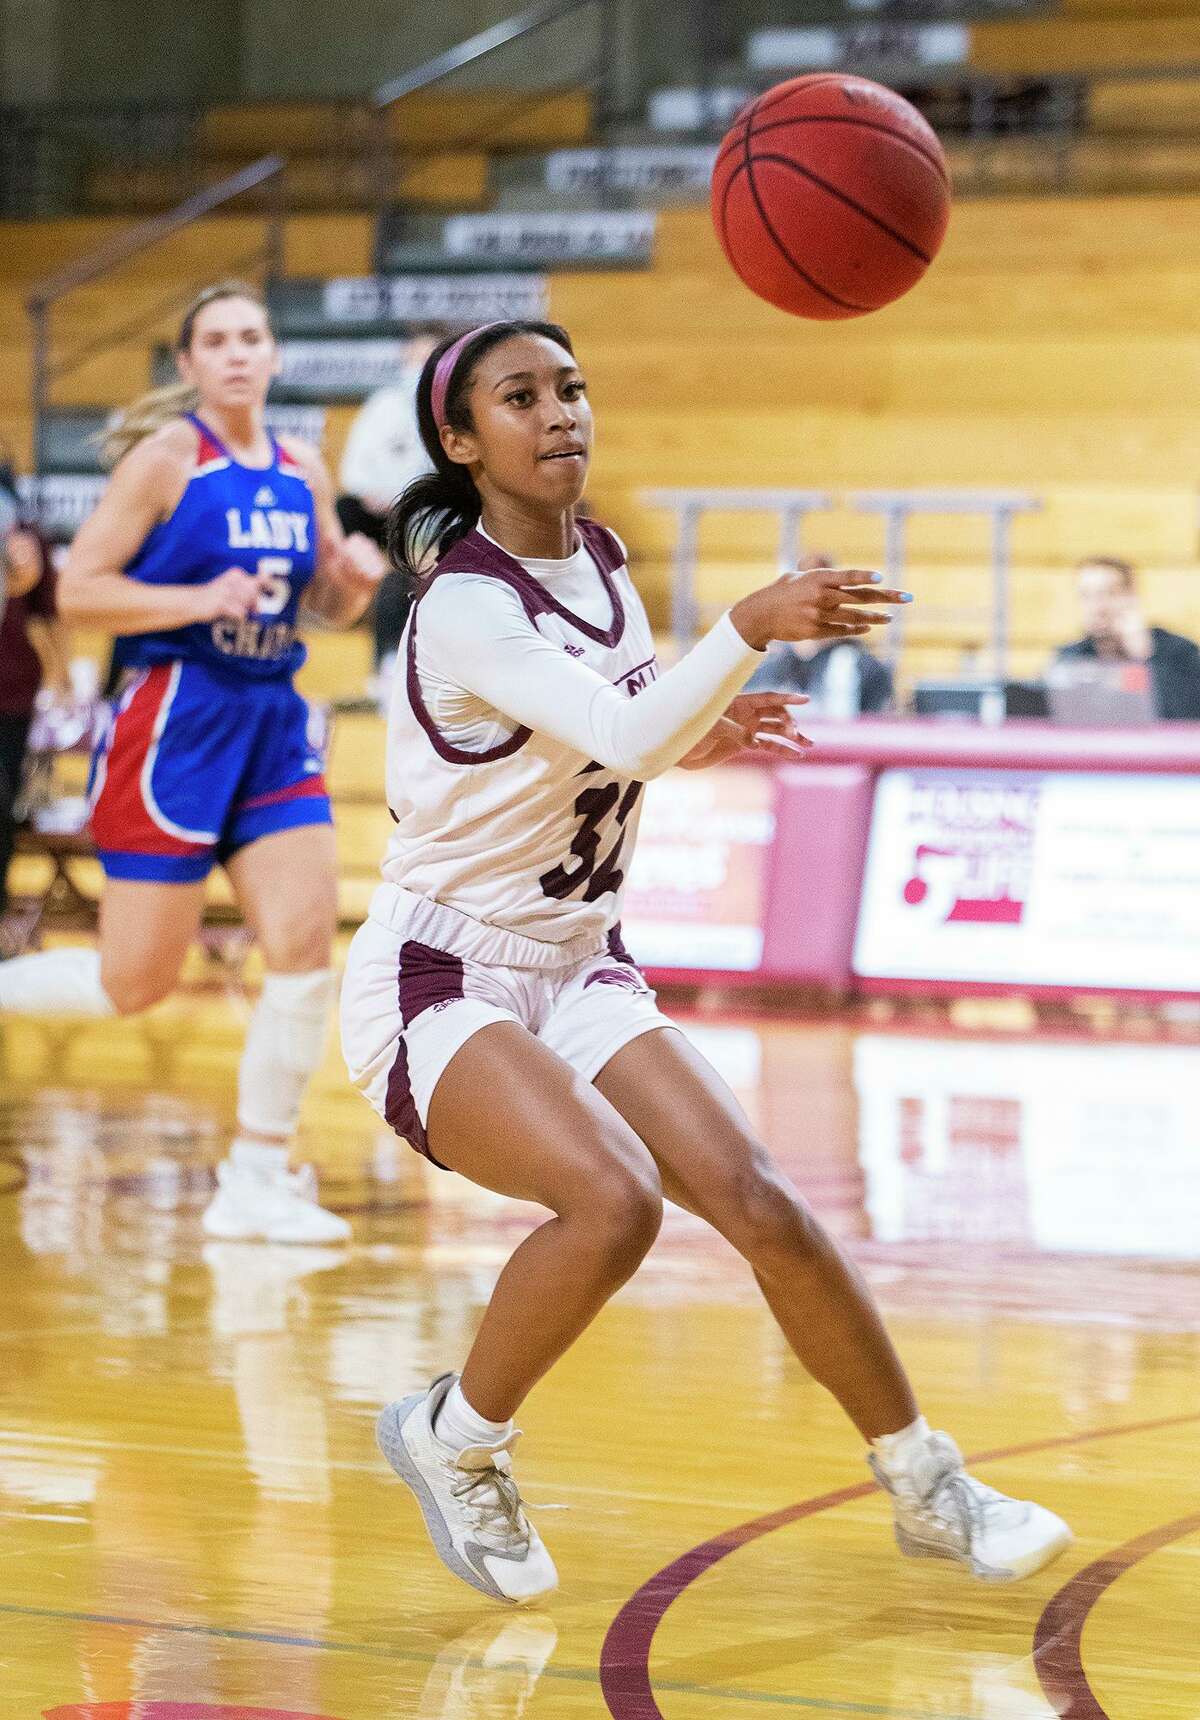 Kayla Presley passes the ball during a game against Lubbock Christian University, Sunday, Jan. 2, 2022.